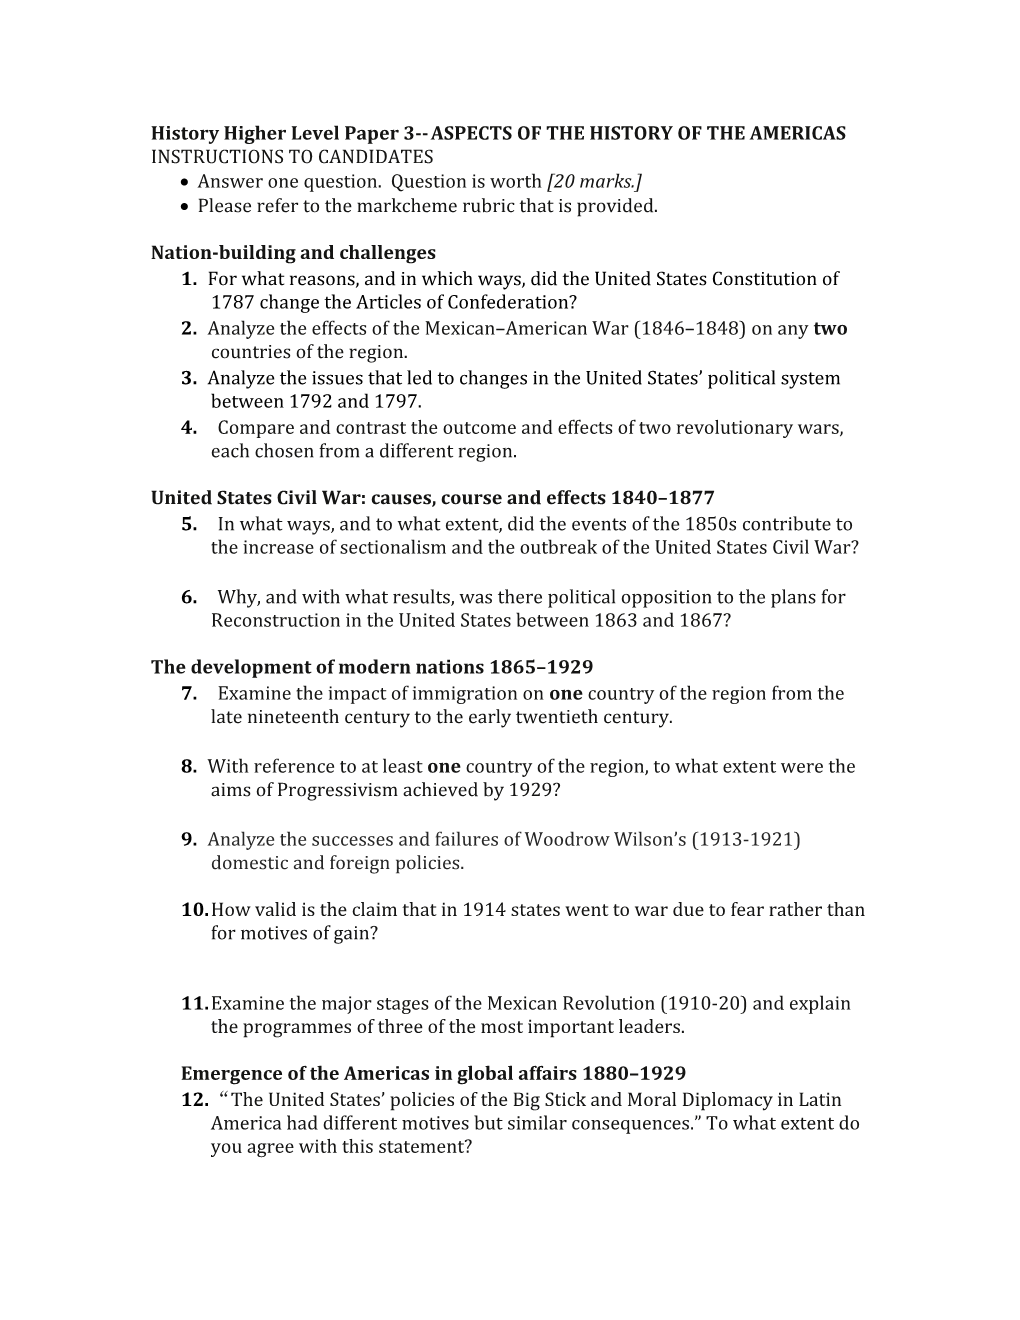 History Higher Level Paper 3 ASPECTS of the HISTORY of the AMERICAS